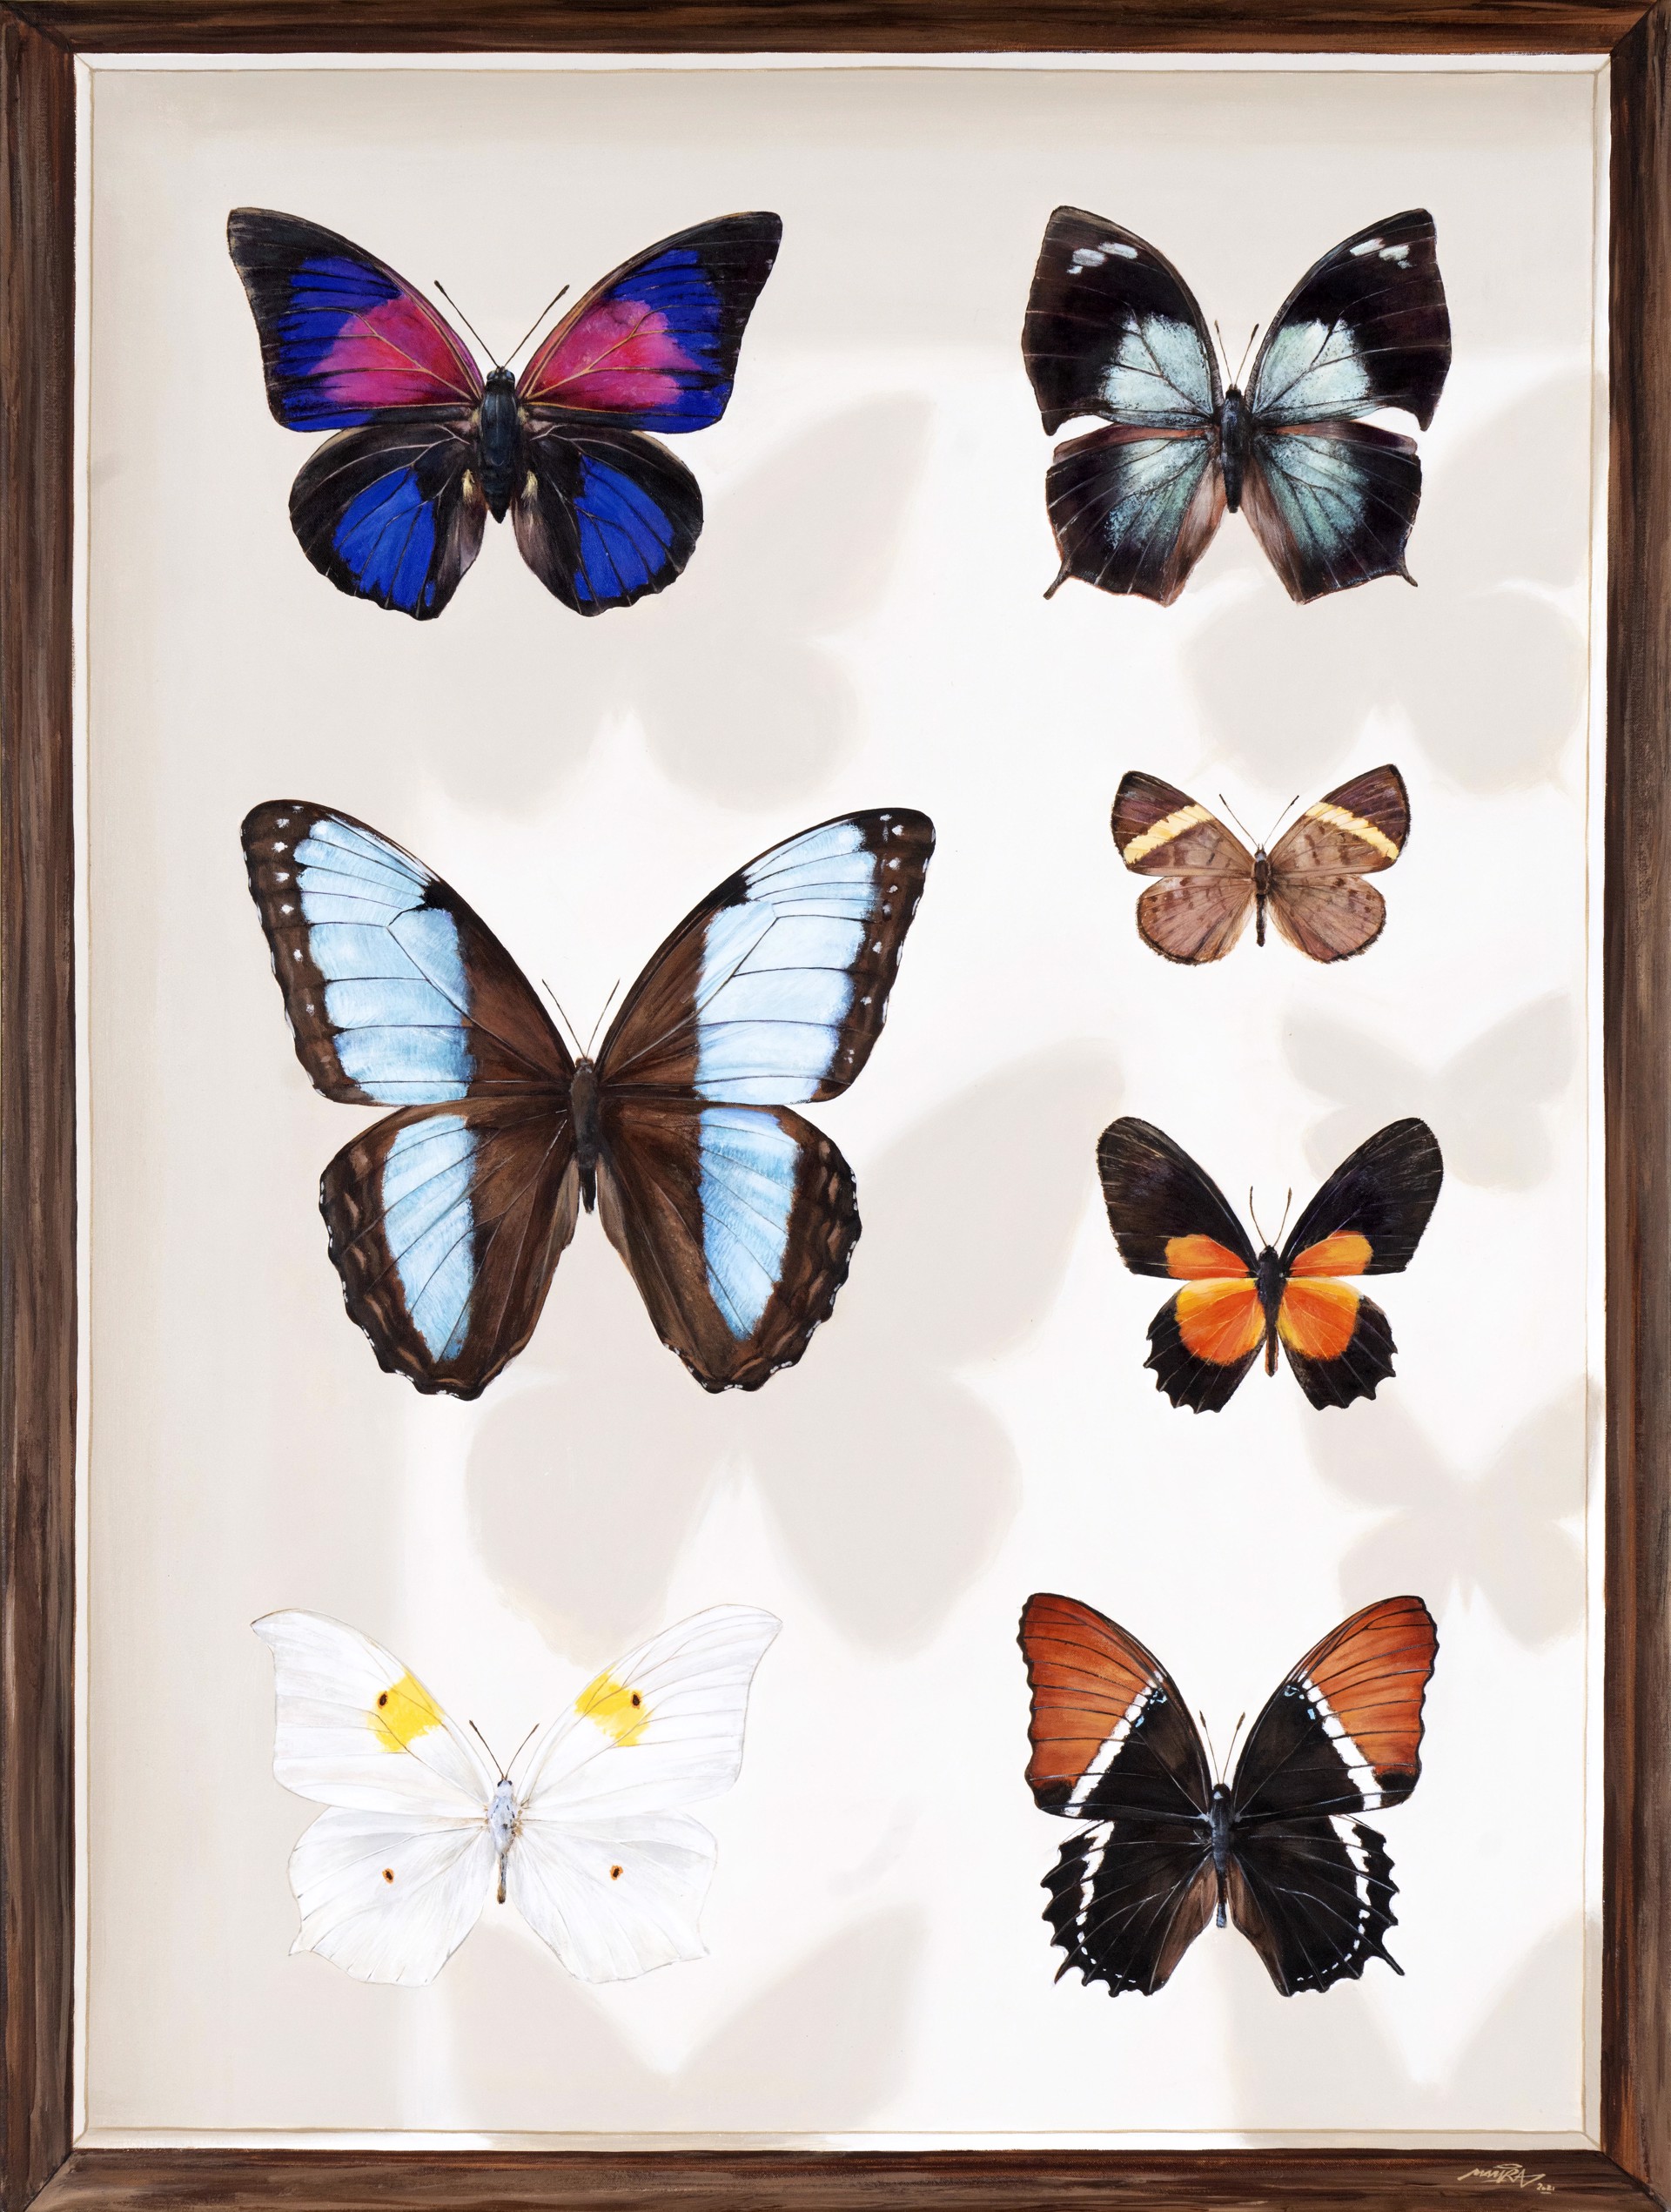 Butterflies of Mexico - Board 2 by Mantra